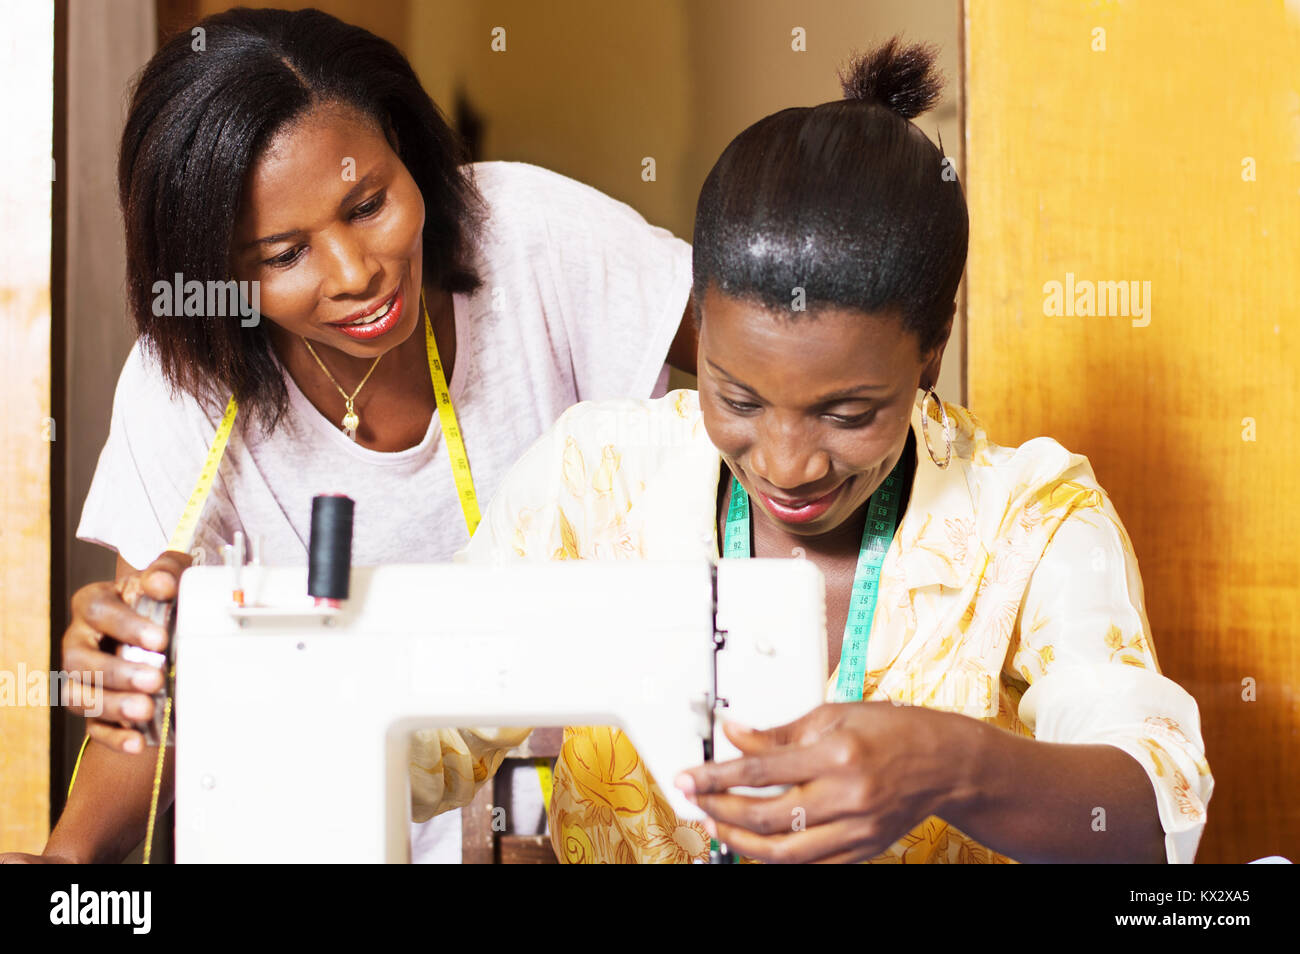 The professional seamstress sews and his trainee assists from behind. Stock Photo